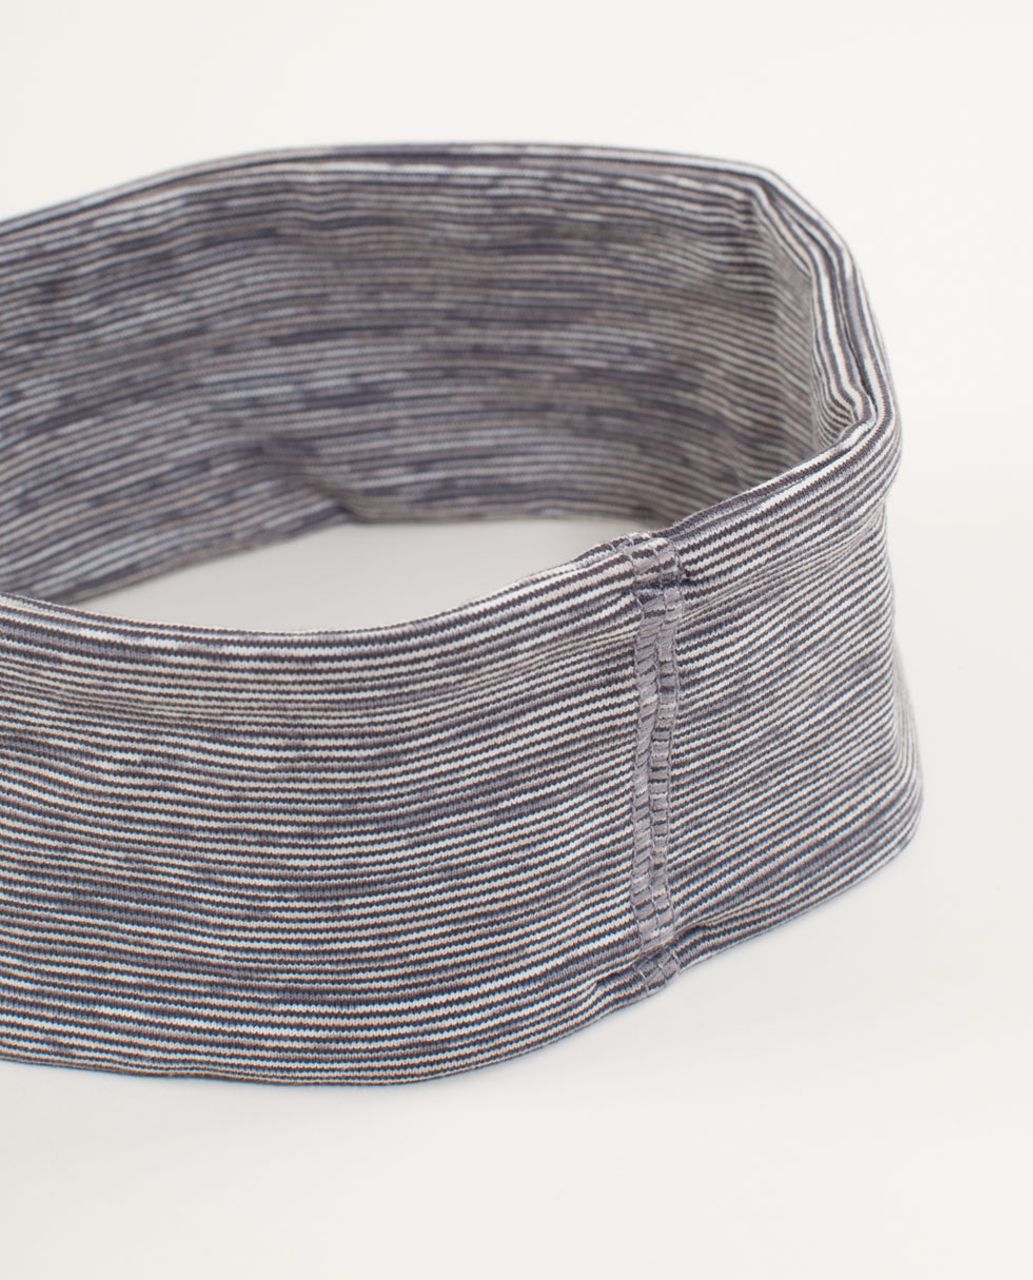 Lululemon Lucky Luon Headband - Wee Are From Space Coal Fossil